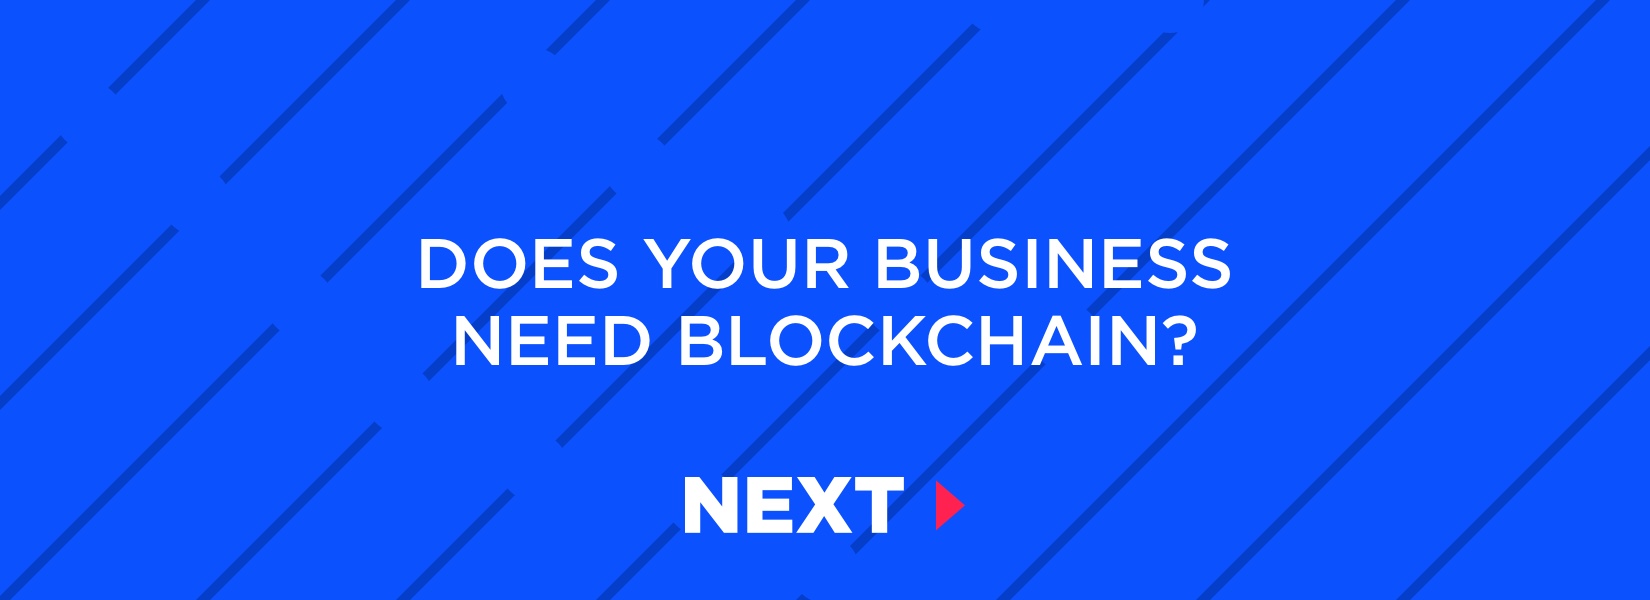 How to know if your business needs blockchain?